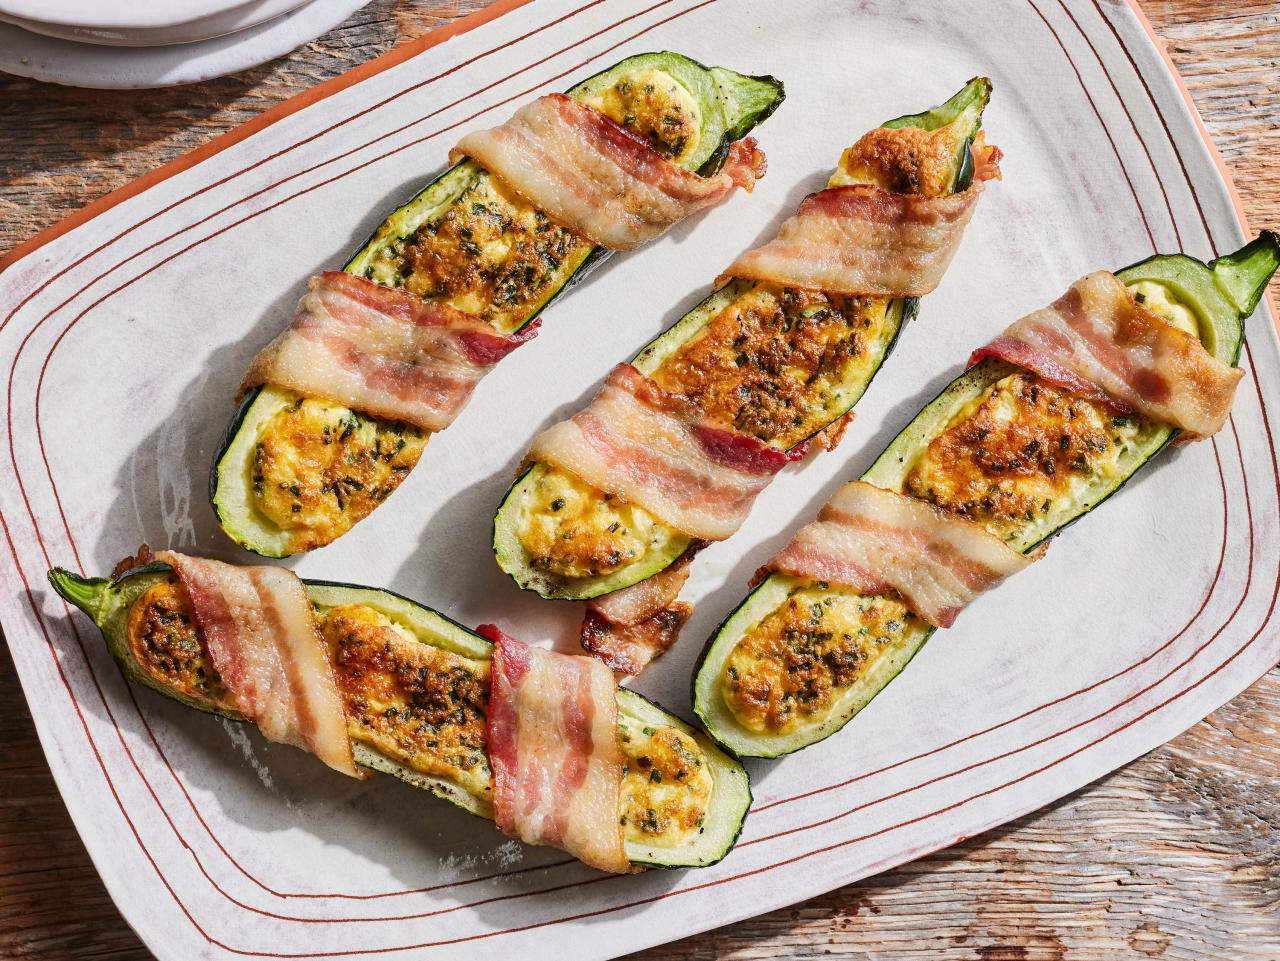 https://food.fnr.sndimg.com/content/dam/images/food/fullset/2022/04/04/0/FN_GRILLED-BACON-FN_EGG-AND-CHEESE-ZUCCHINI-BOATS-H-f_s4x3.jpg.rend.hgtvcom.1280.960.suffix/1649101709274.jpeg